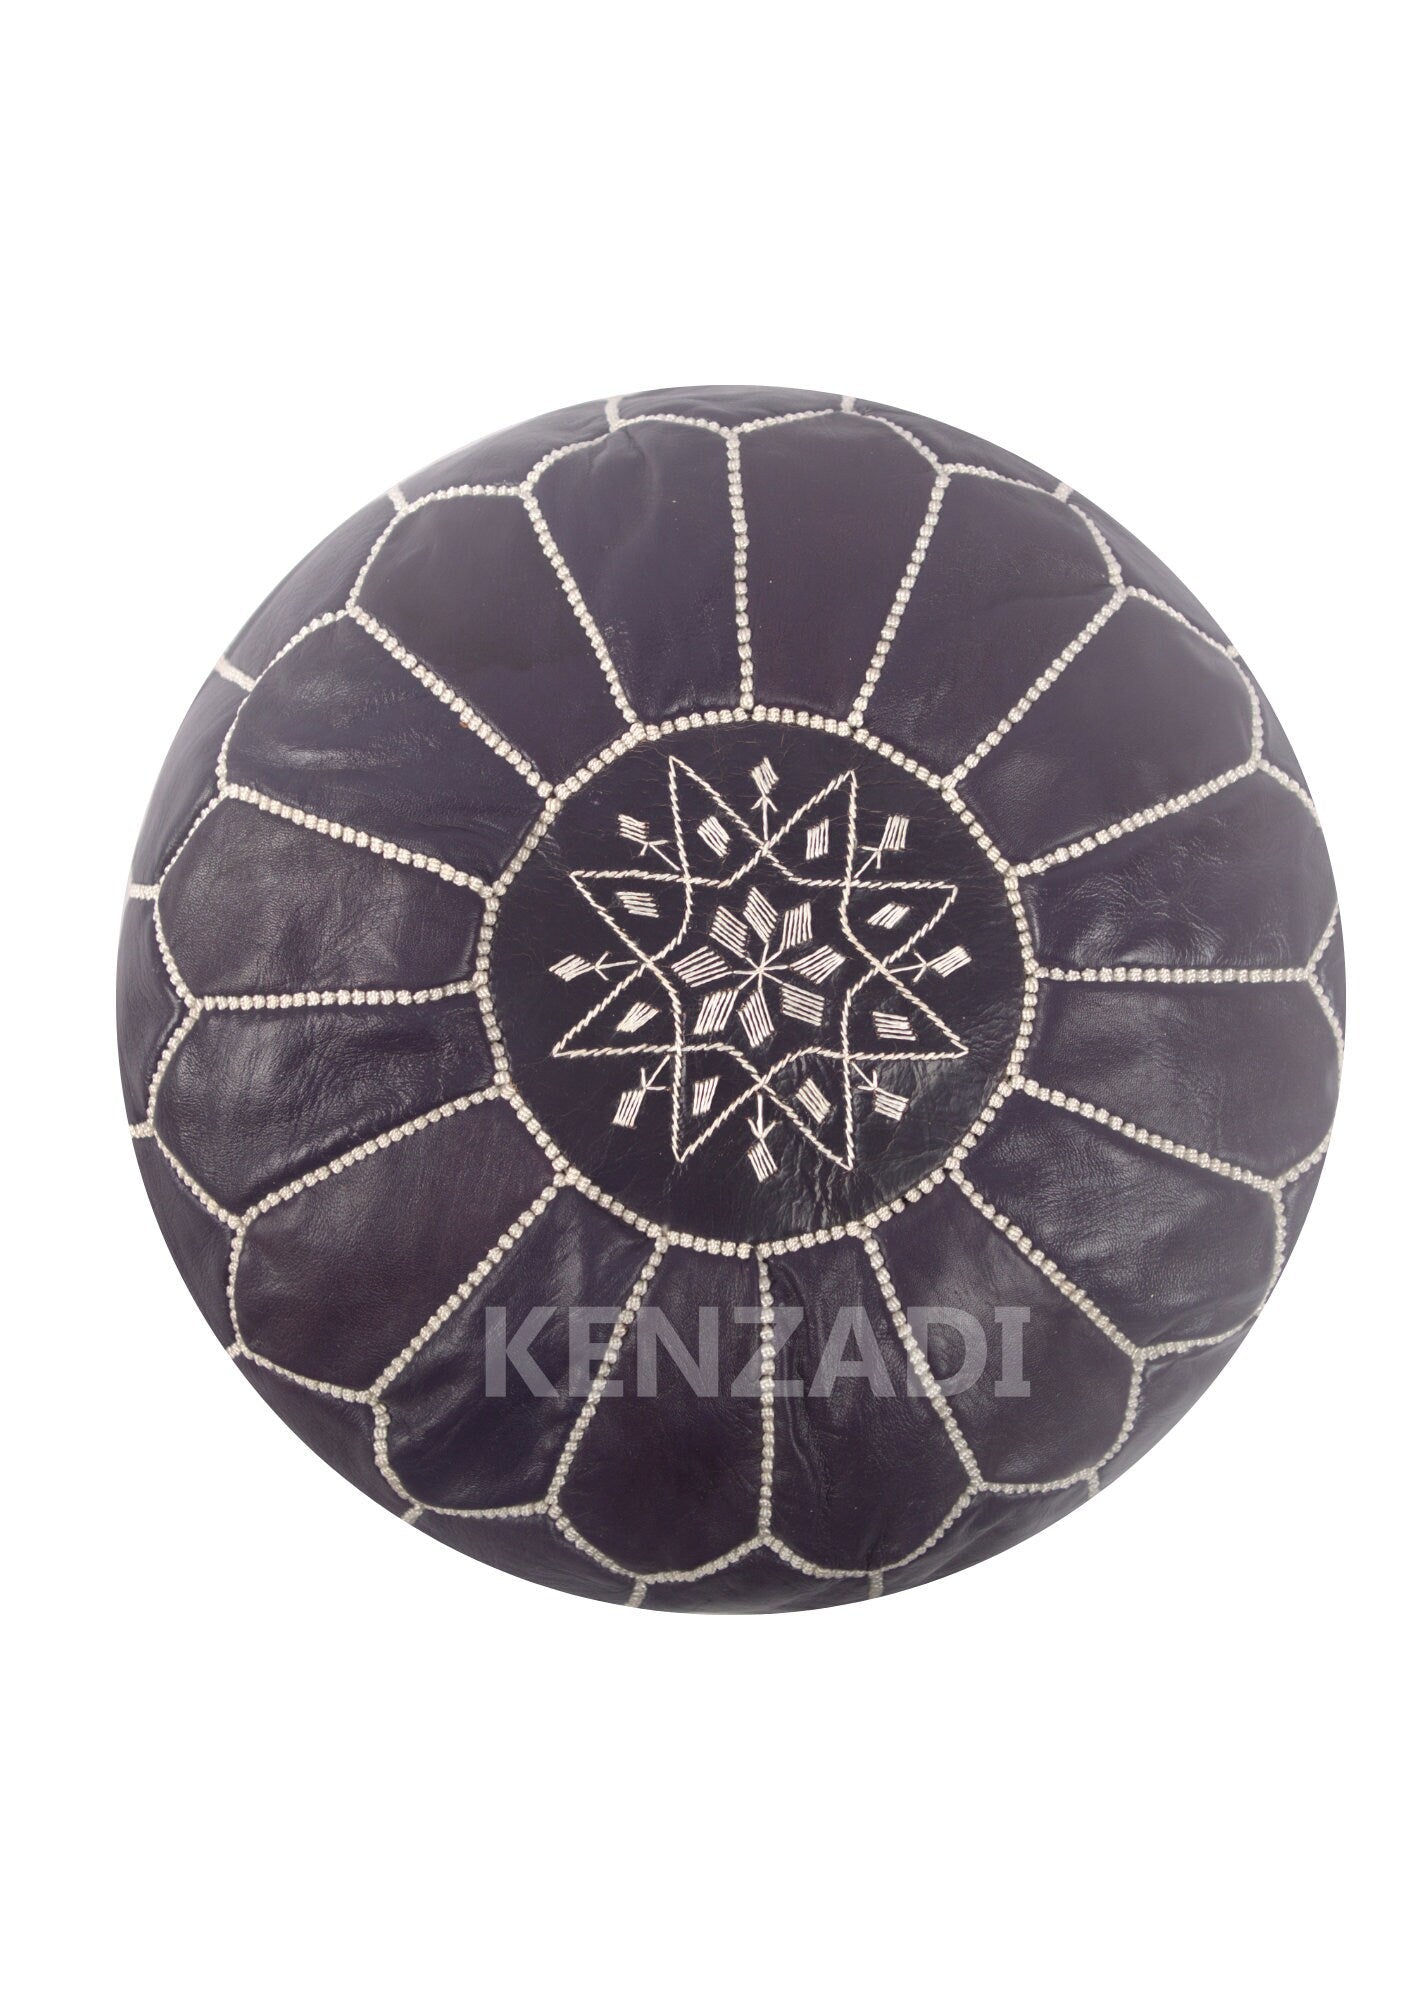 Authentic Moroccan leather pouf with white embroidery, dark purple color. Handmade, round, and versatile